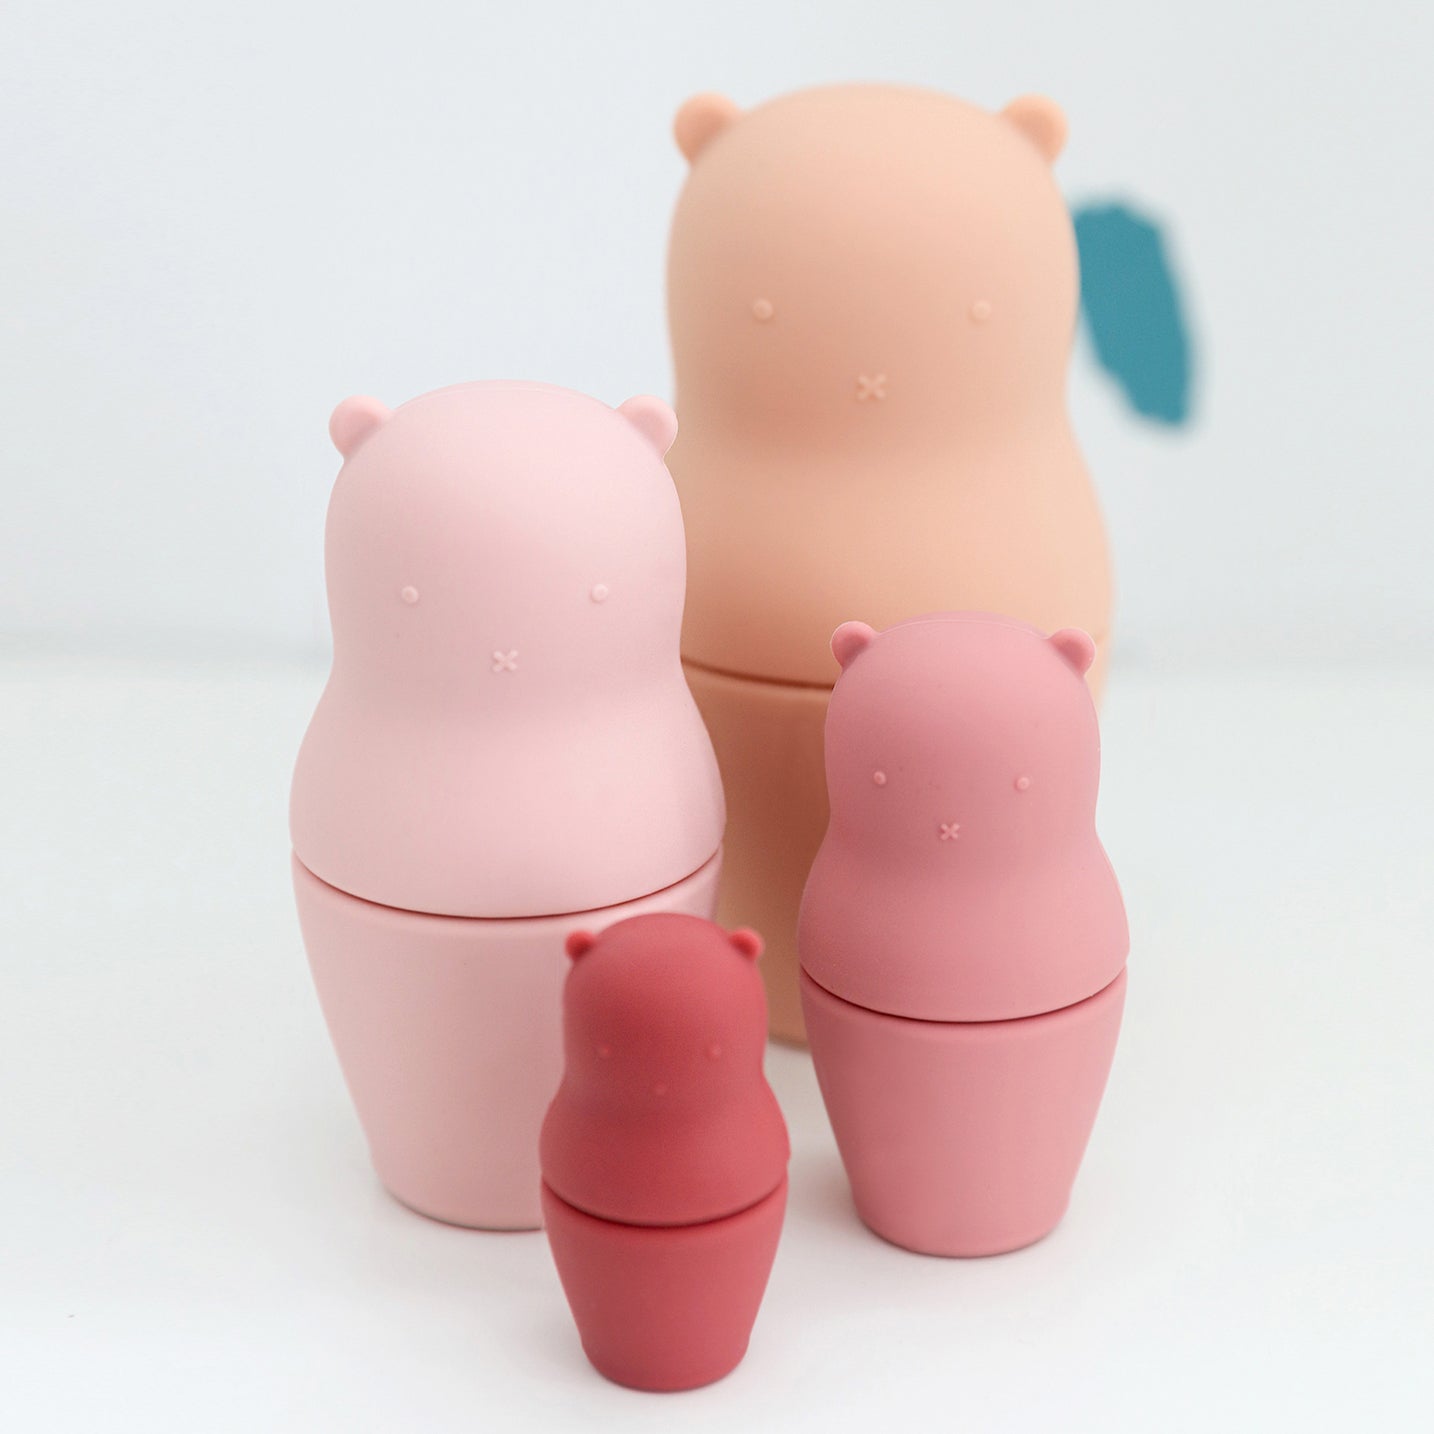 Pink Silicone Nesting Bears